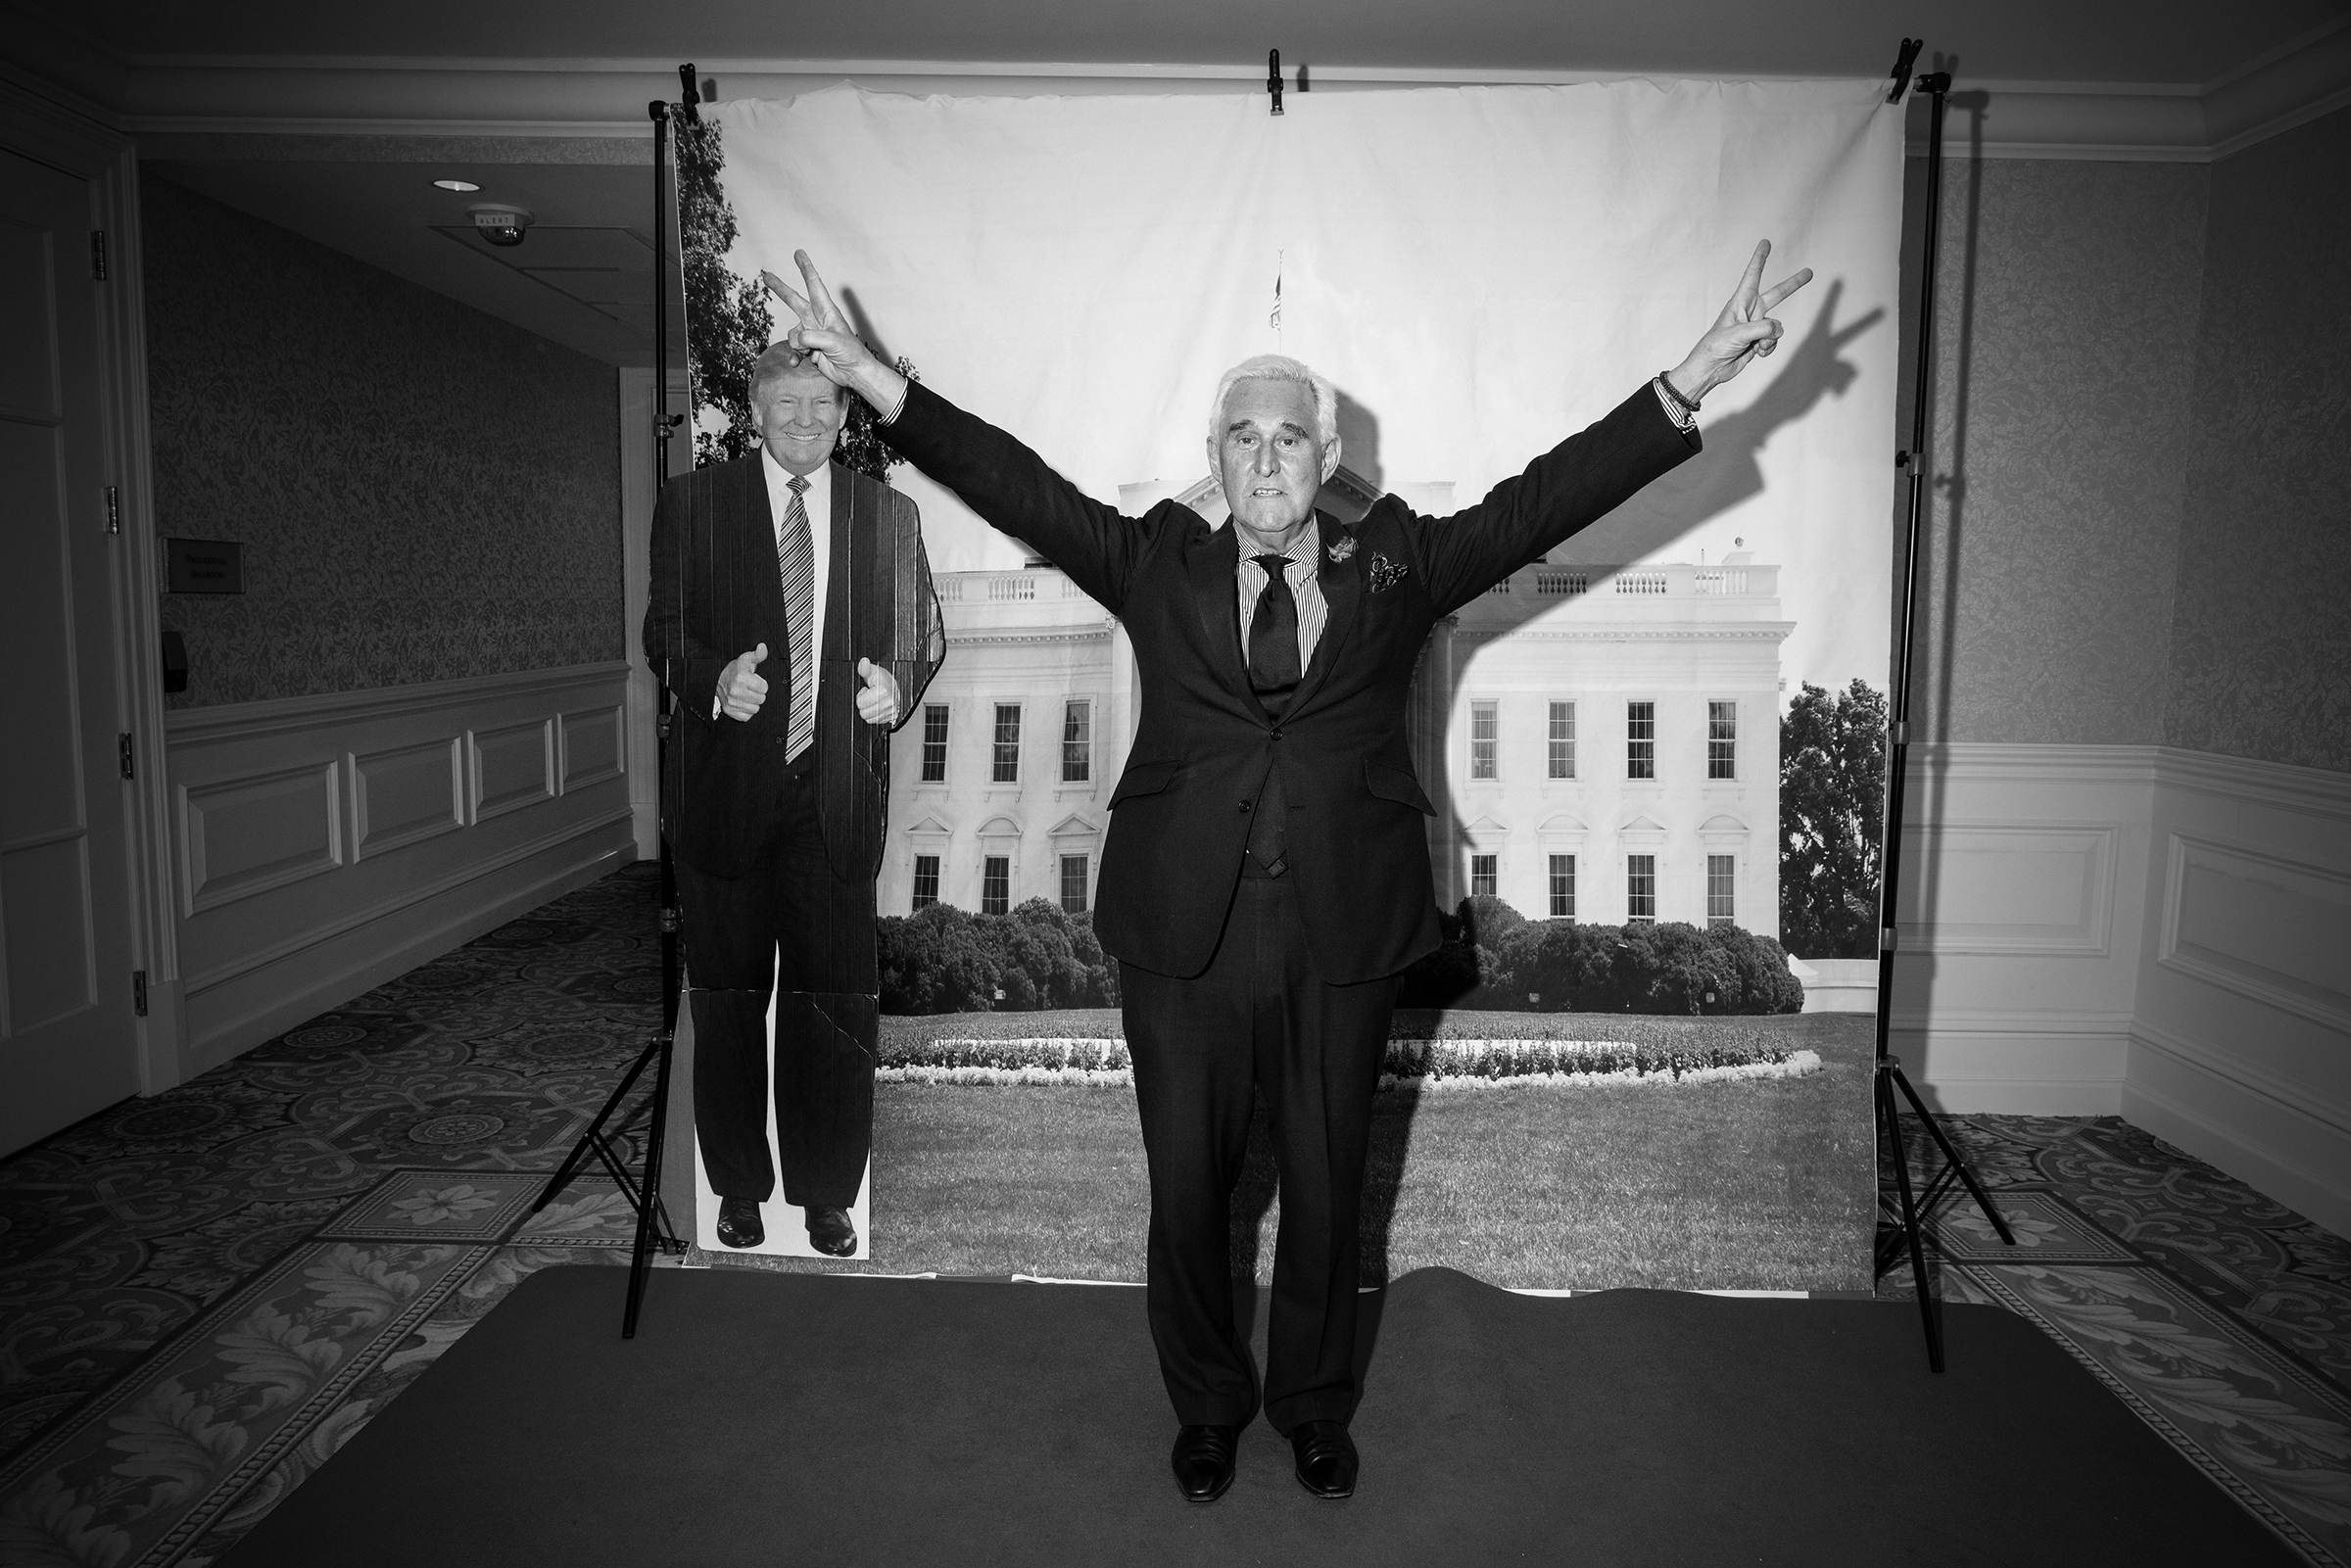 Roger Stone, a former political advisor to President Trump, at a ​Virginia Women For Trump event on Feb. 2, 2019.